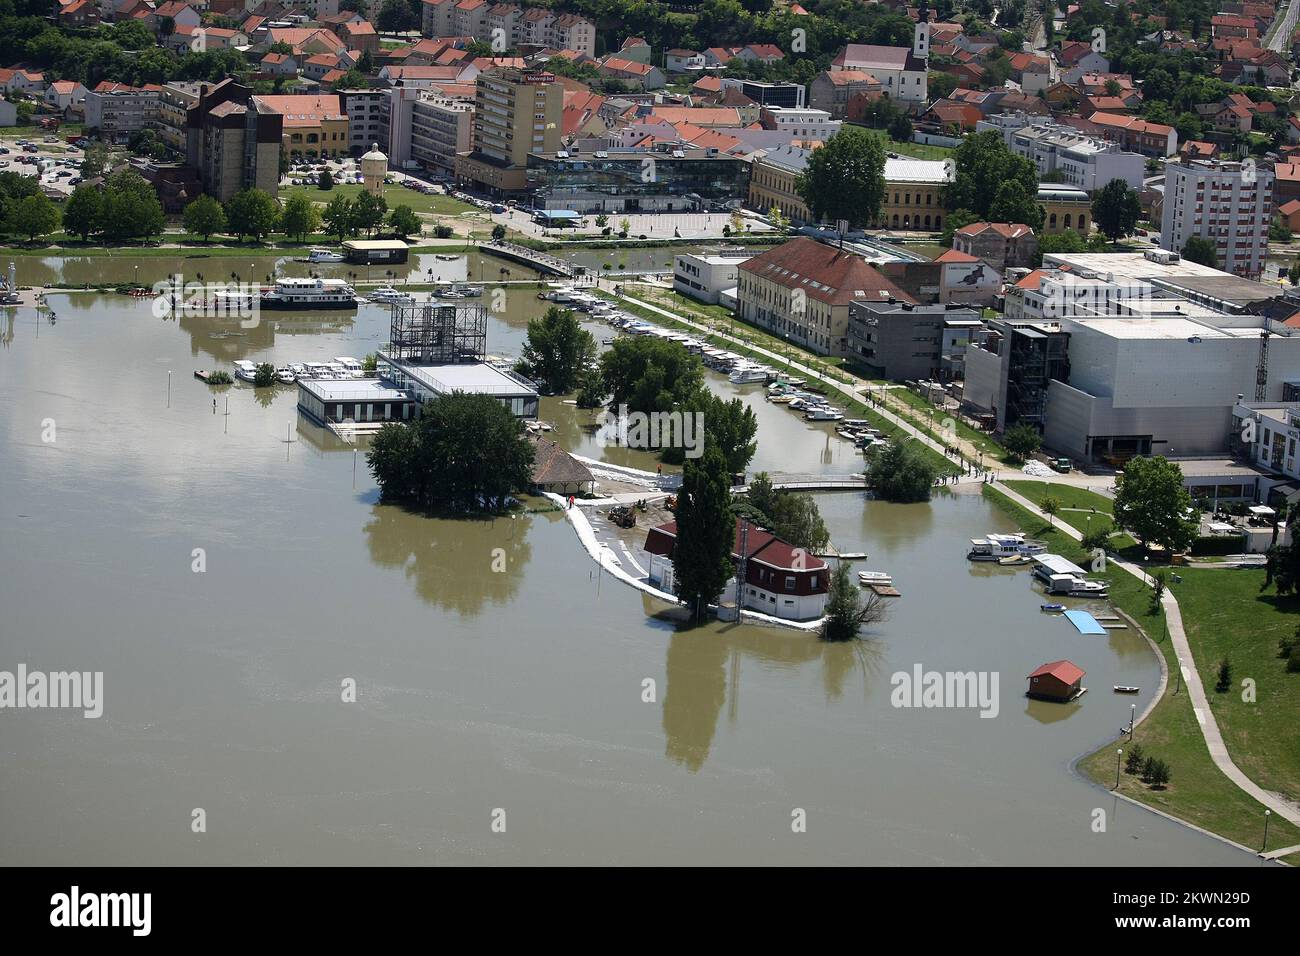 14.06.2013: Vukovar - The peak of the Danube flood-wave came to east Croatia when the level of the water reached 7.72 metres, which was the second highest record since the river water measurement was introduced at that spot. Photo: Davor Javorovic/PIXSELL Stock Photo